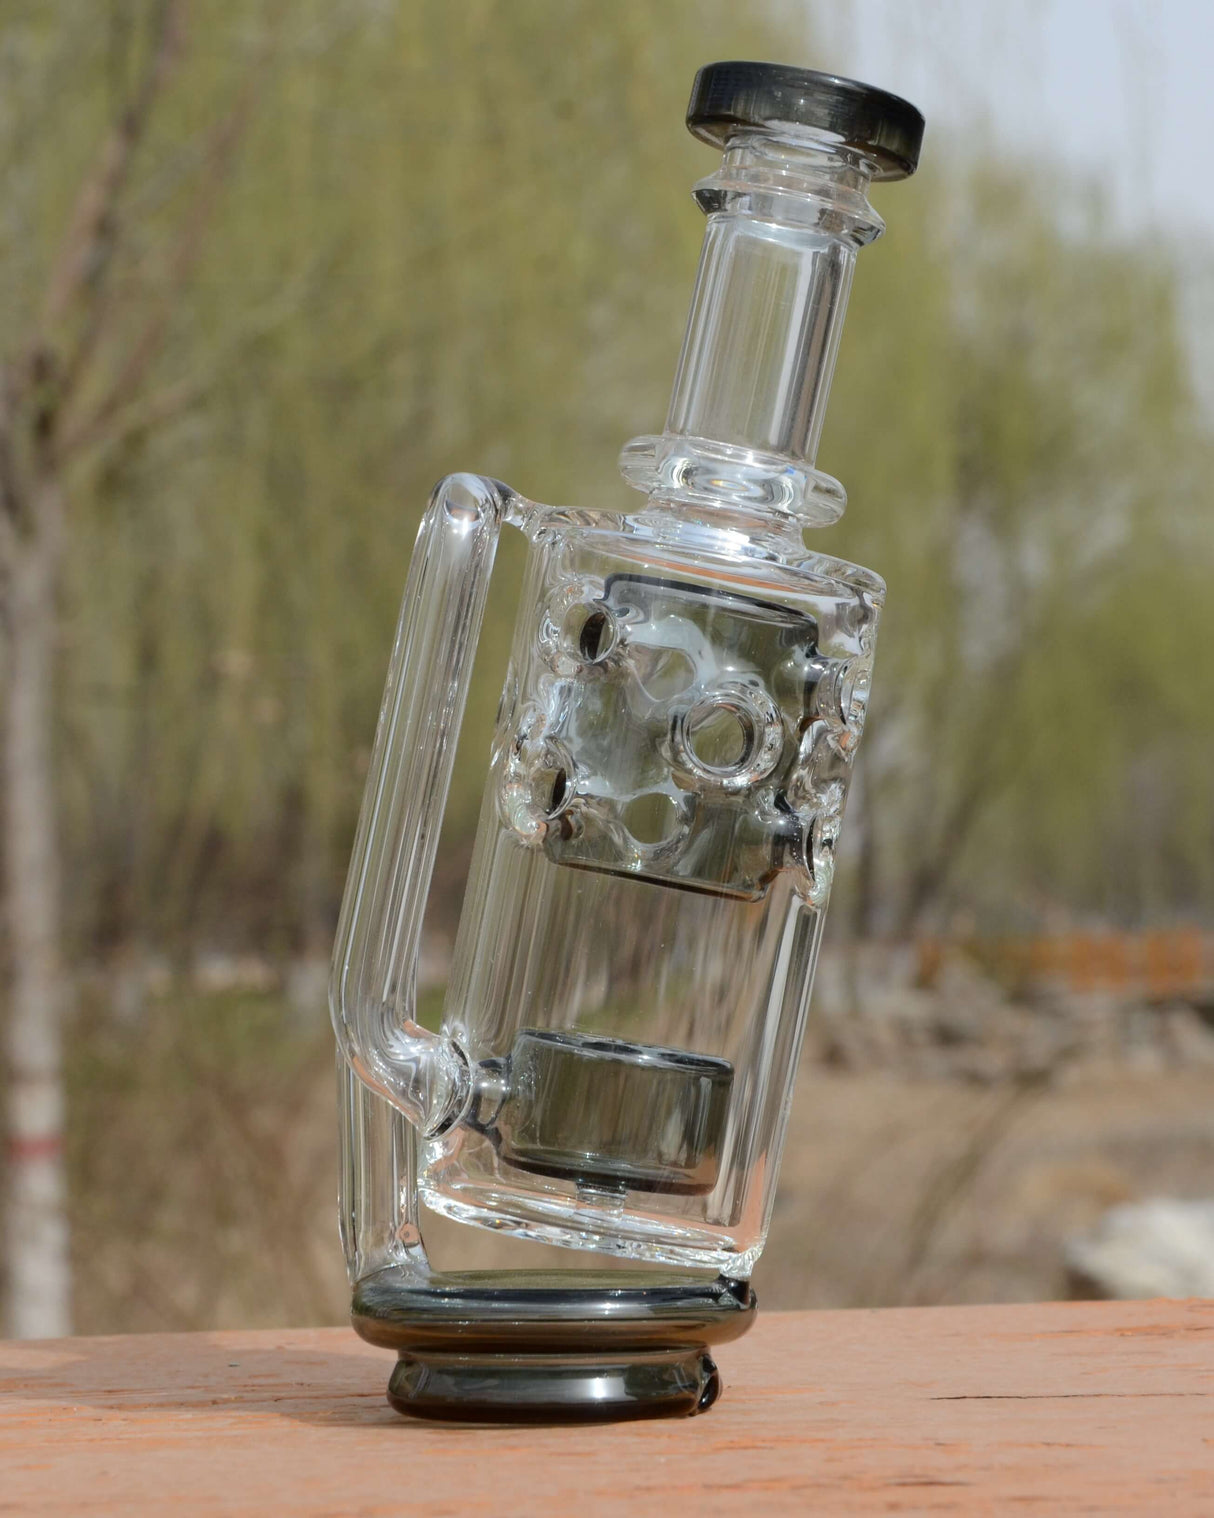 Calibear Straight Fab Puffco Attachment in Clear Glass - Side View on Wooden Surface